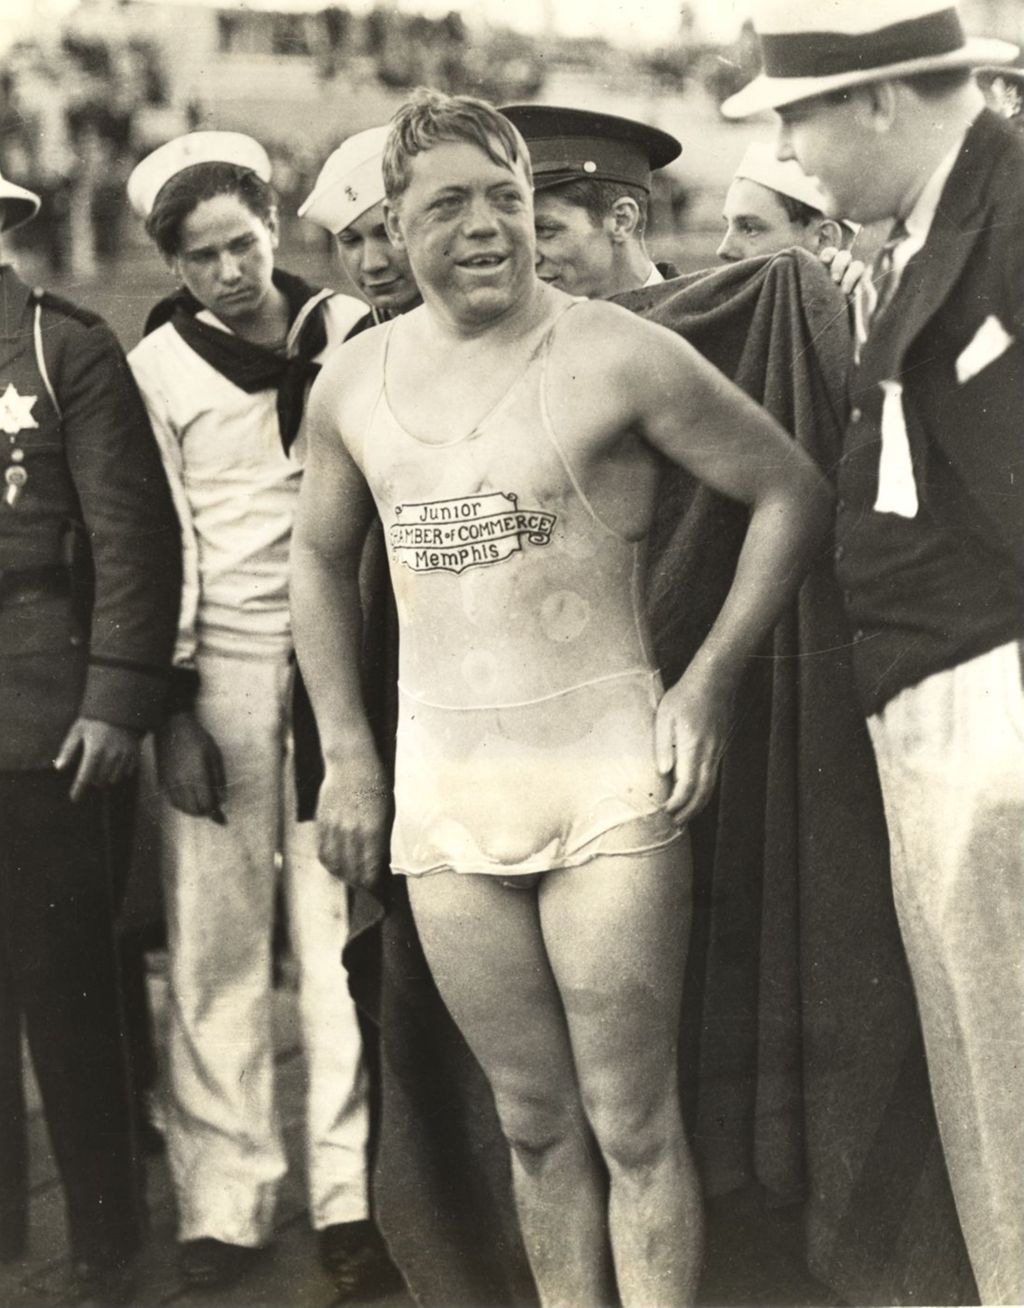 George Blagden, long distance swimmer, finishing second in 15 mile marathon at A Century of Progress in 1933